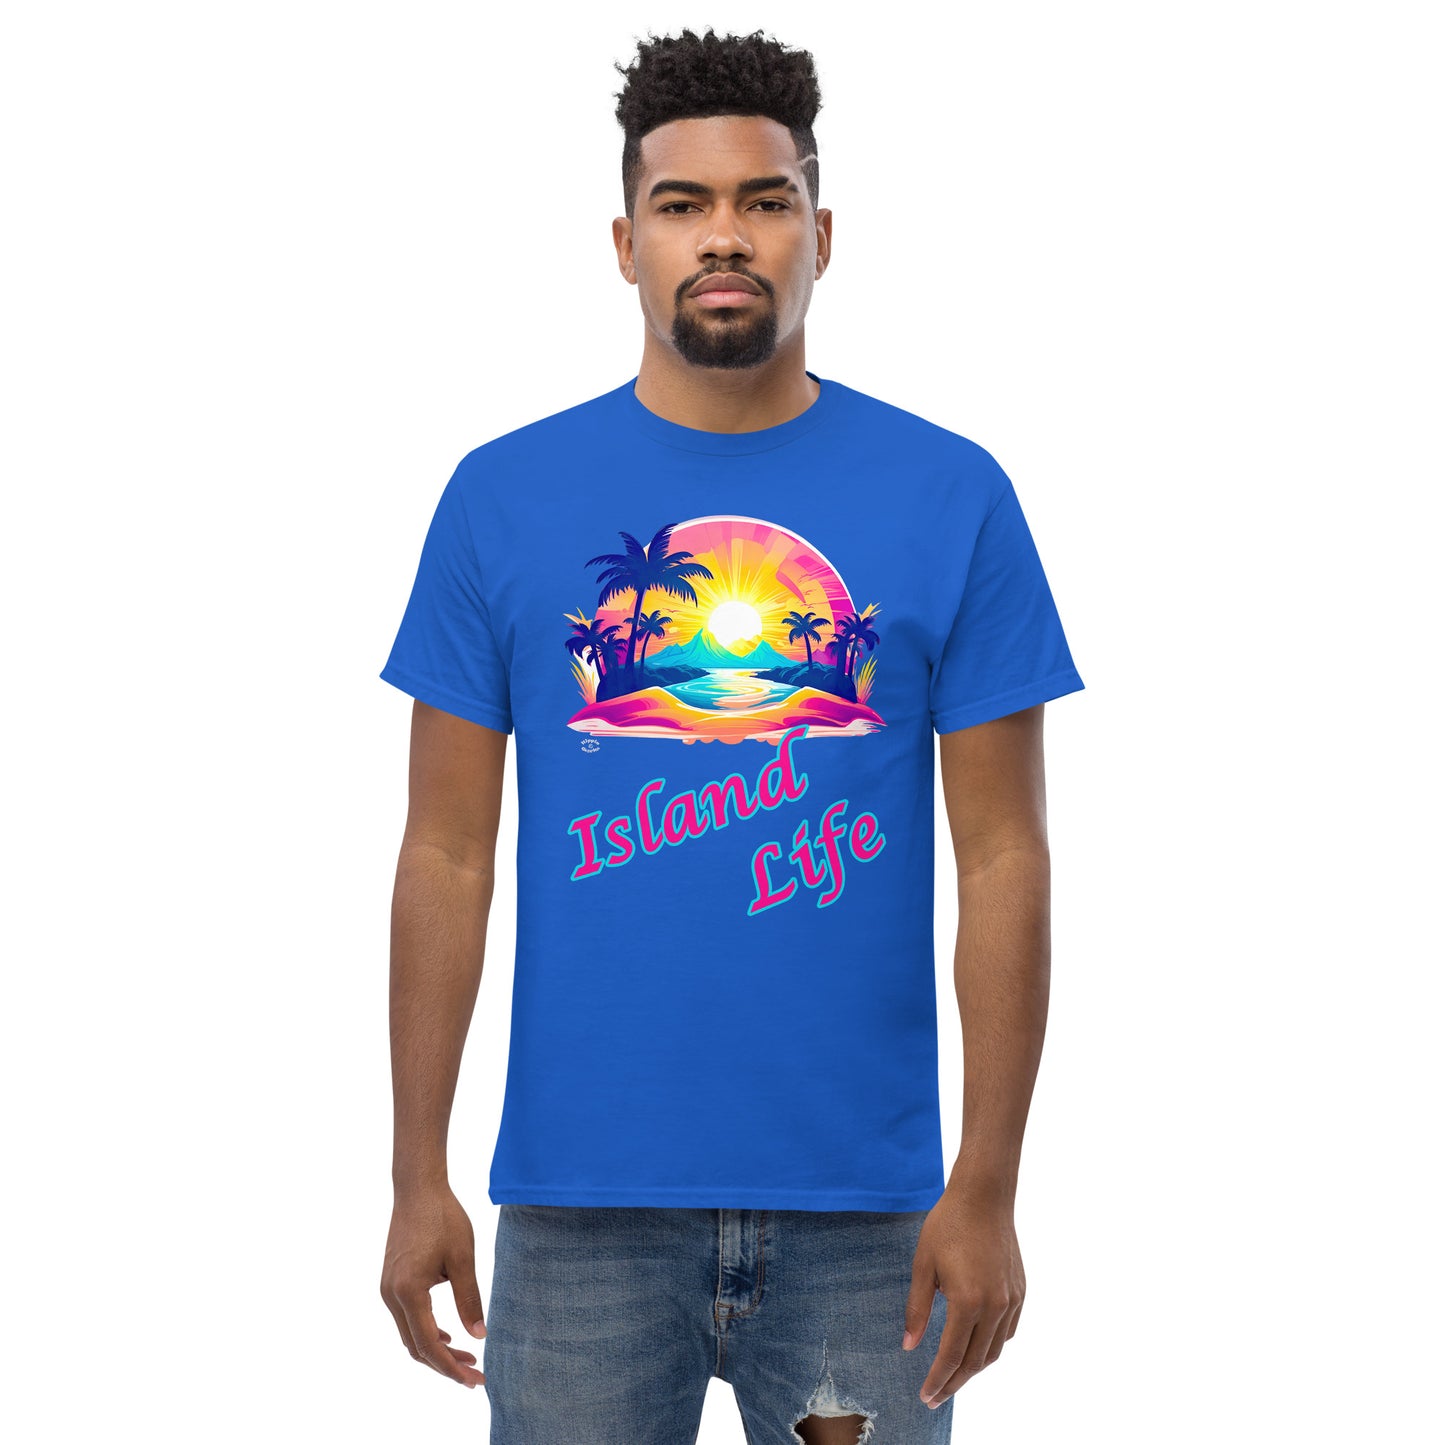 A picture of a man modeling a Men's Classic Tee / Tshirt with a large picture on the front of a tropical island paradise and the text Island Life underneath - front - royal blue